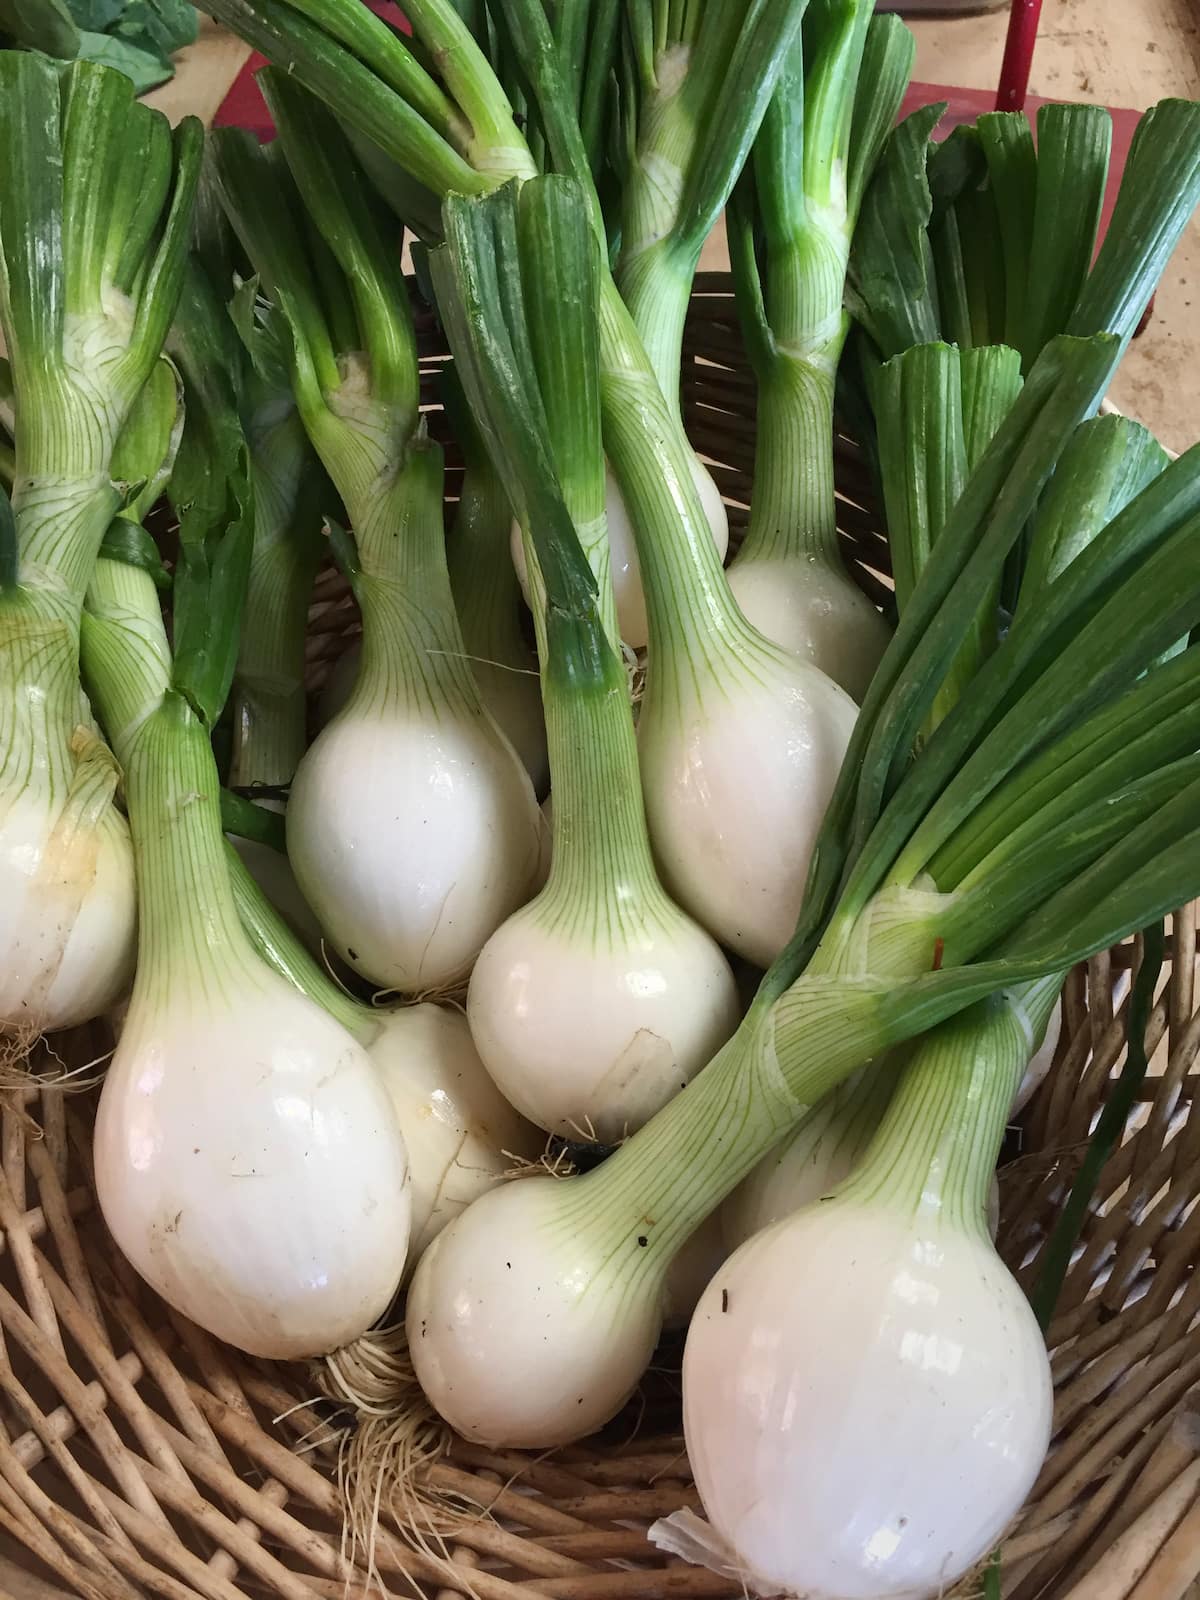 How long do onions last? The best way to store onions to last longer